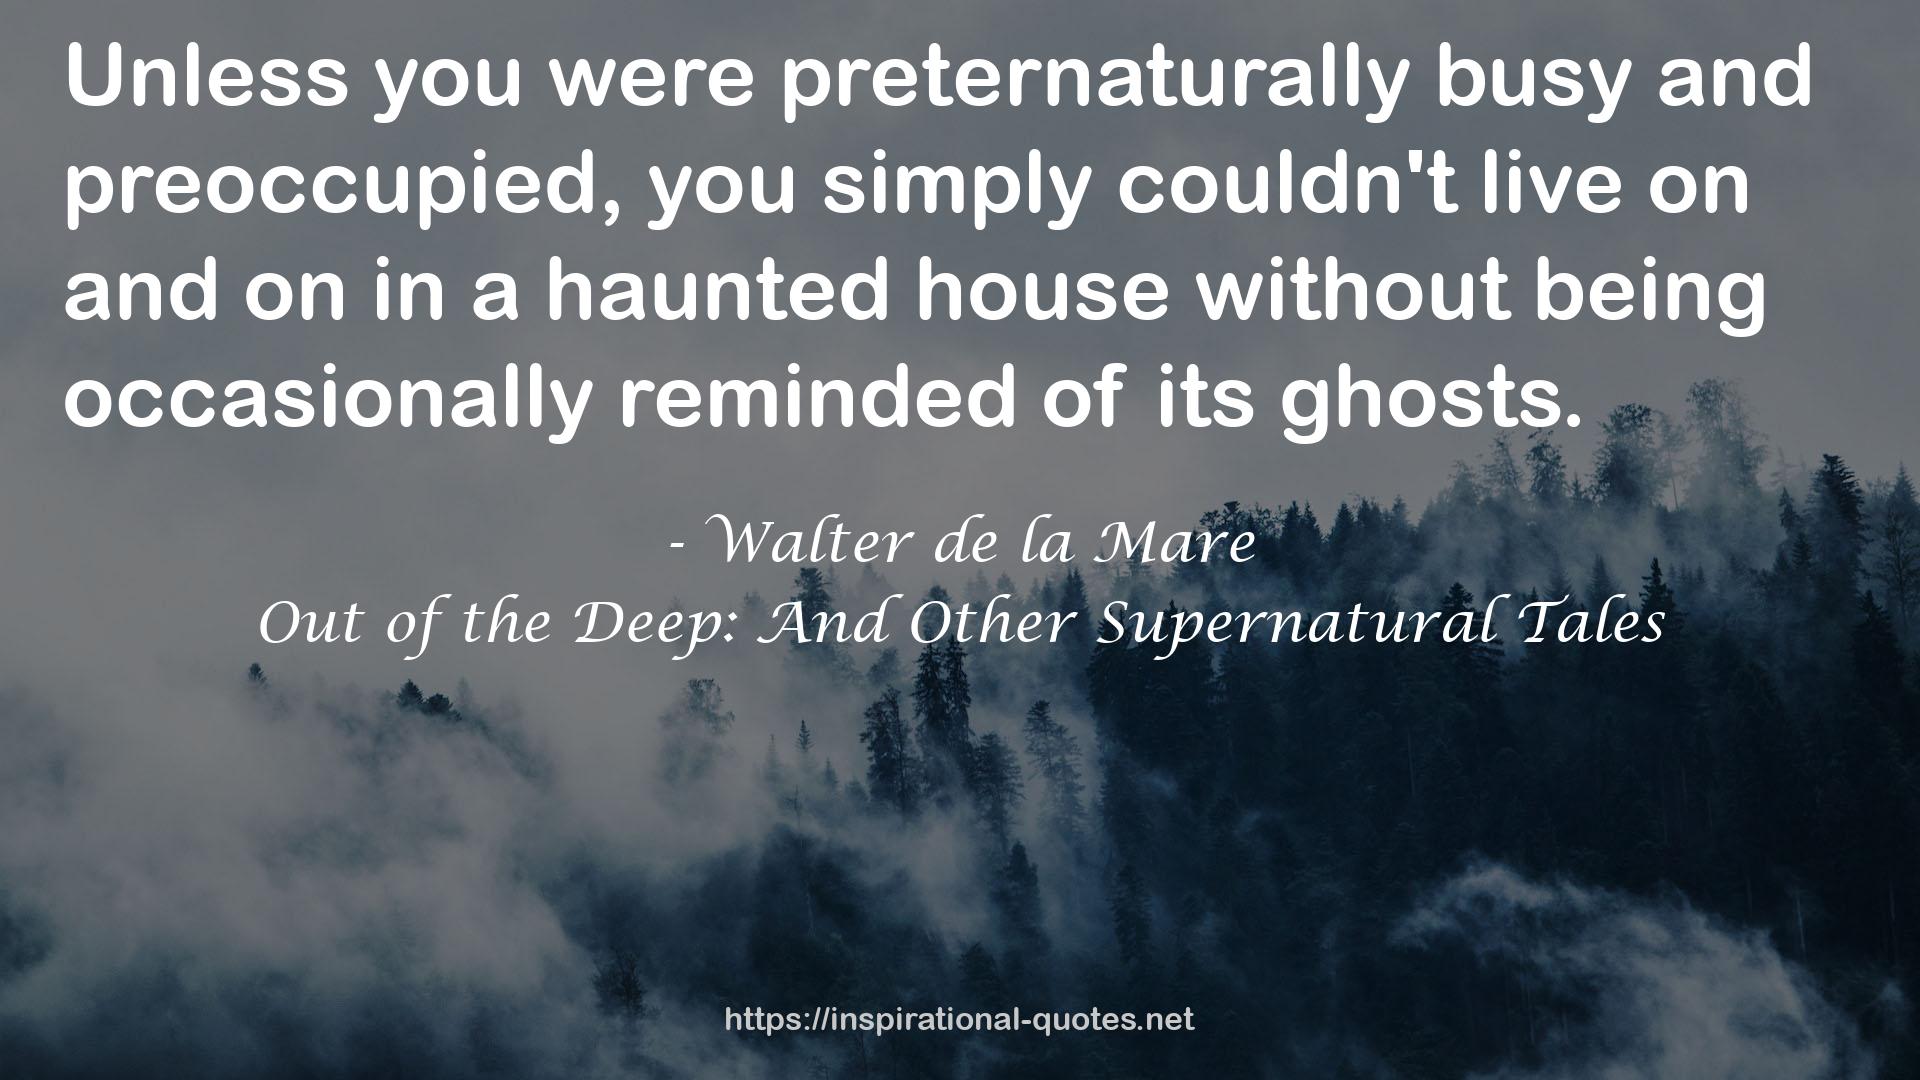 Out of the Deep: And Other Supernatural Tales QUOTES